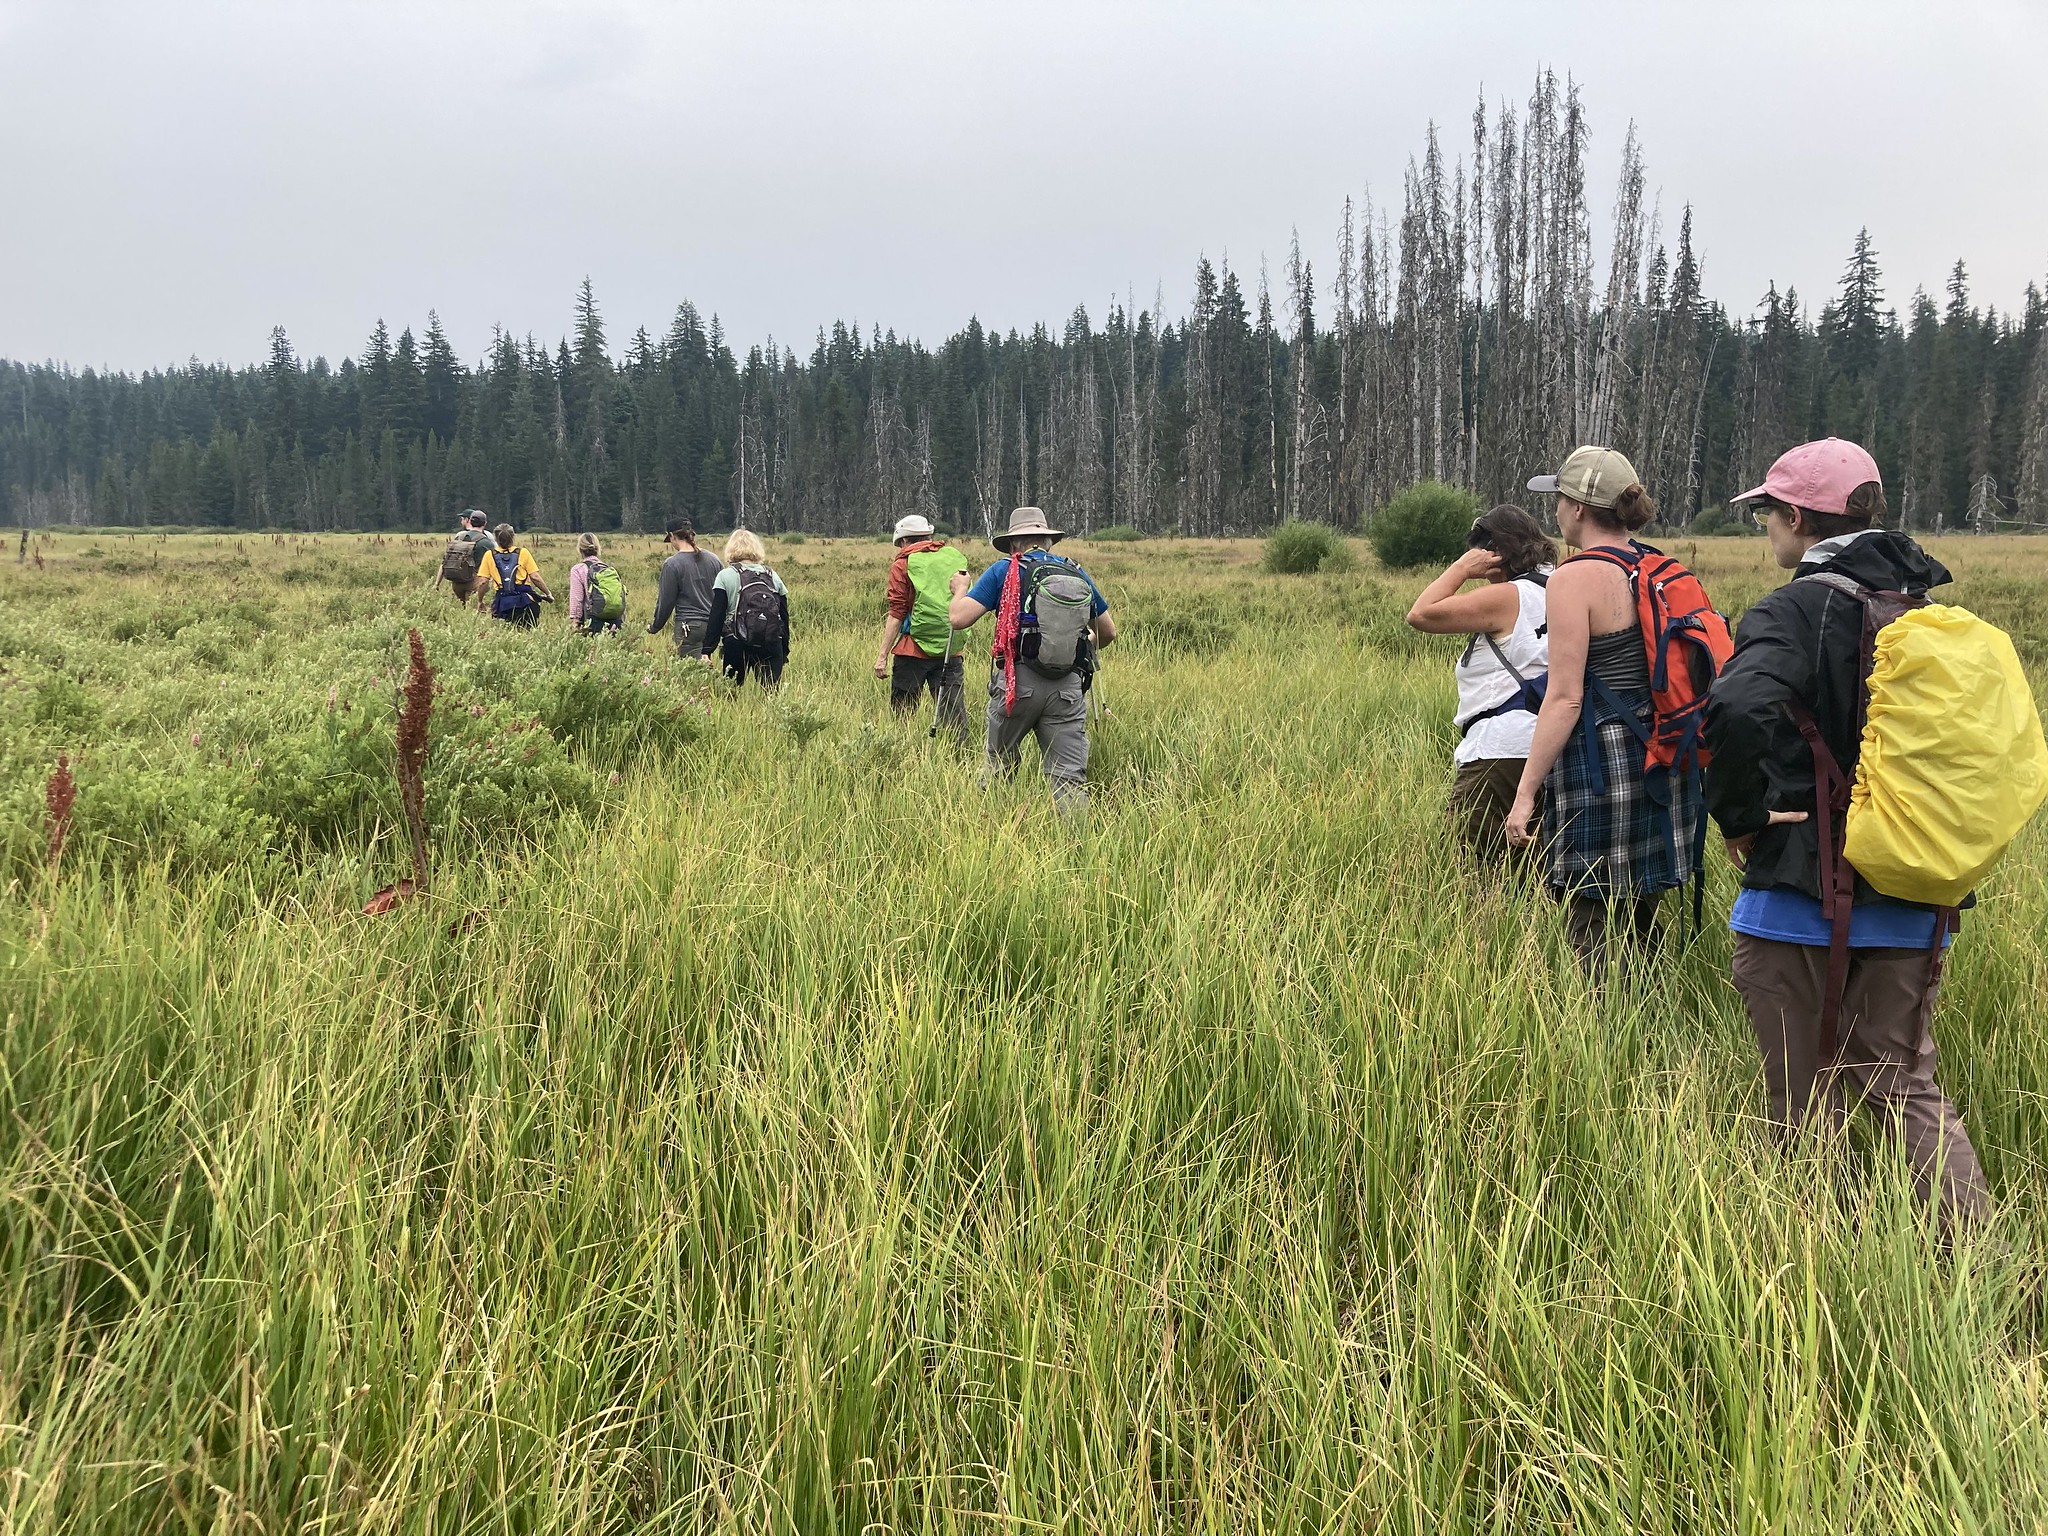 Color photo of a line of volunteers with varying hats and backpacks in a field of green grass. The sky is cloudy and gray against a line of pine trees in the distance.